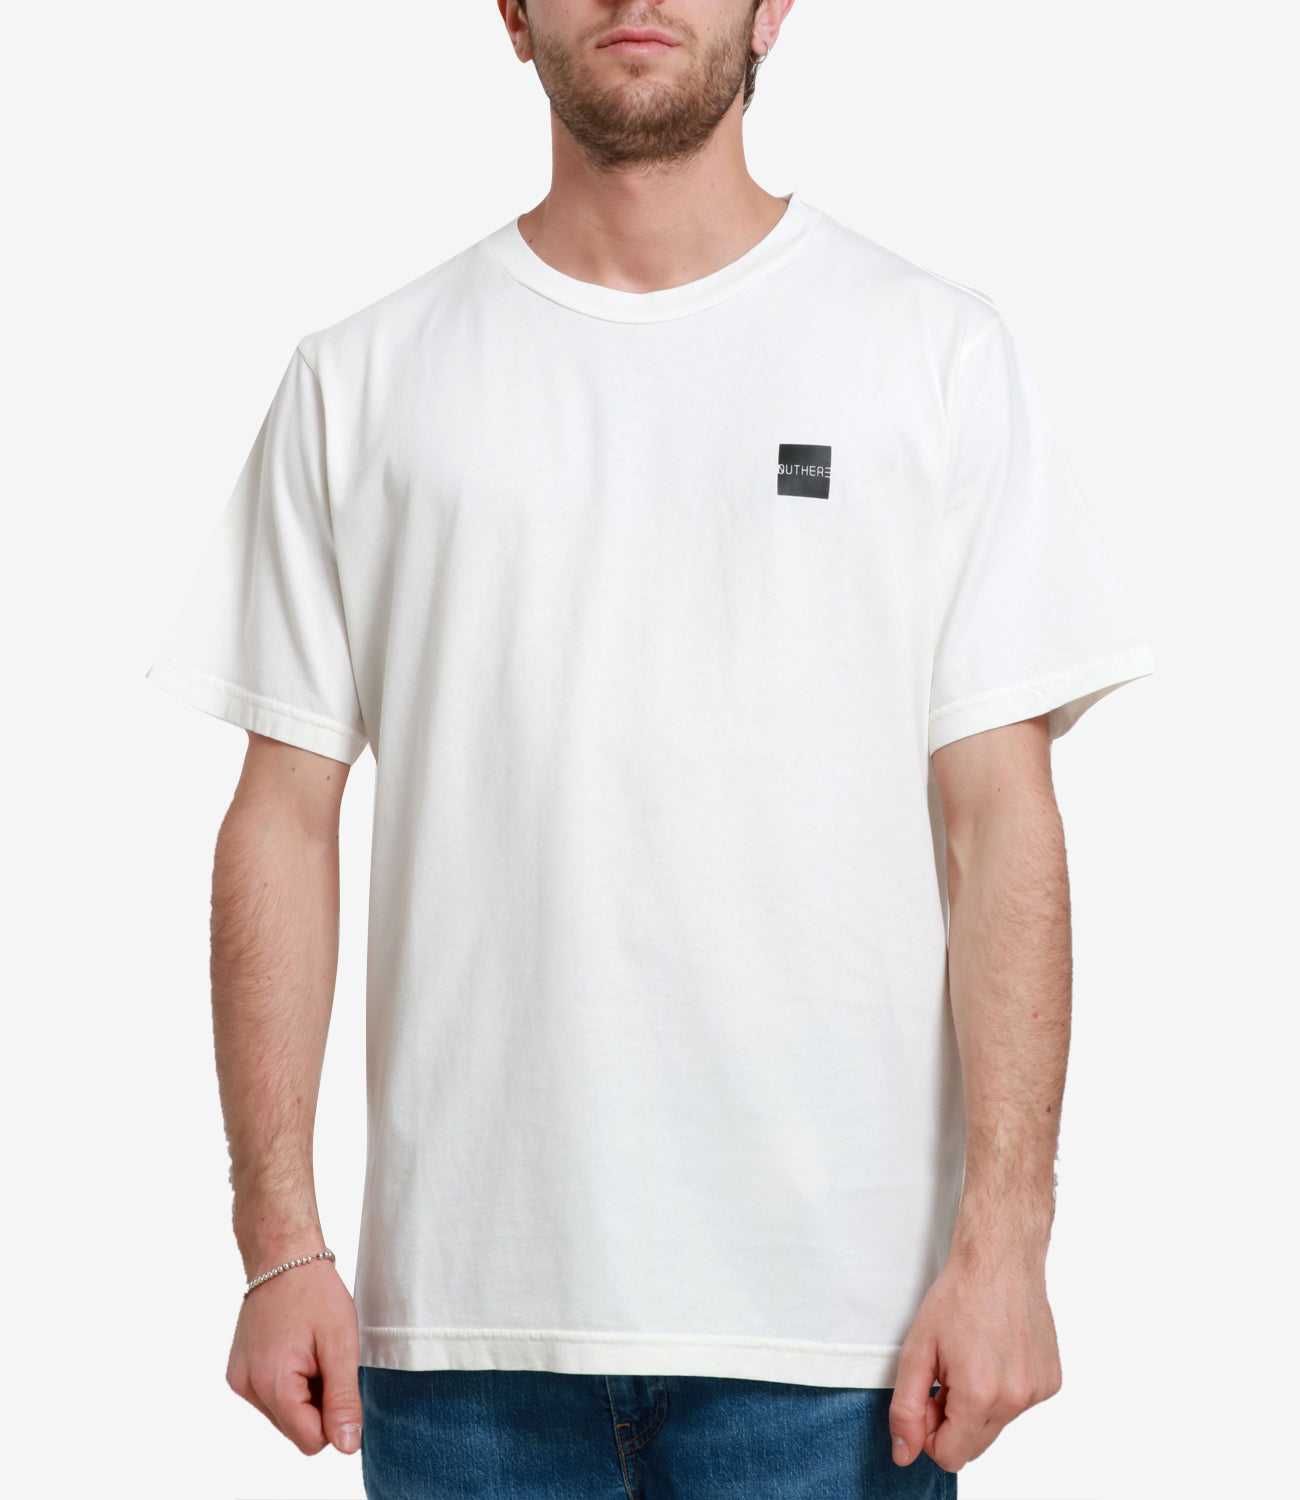 Outhere | T-Shirt Bianco